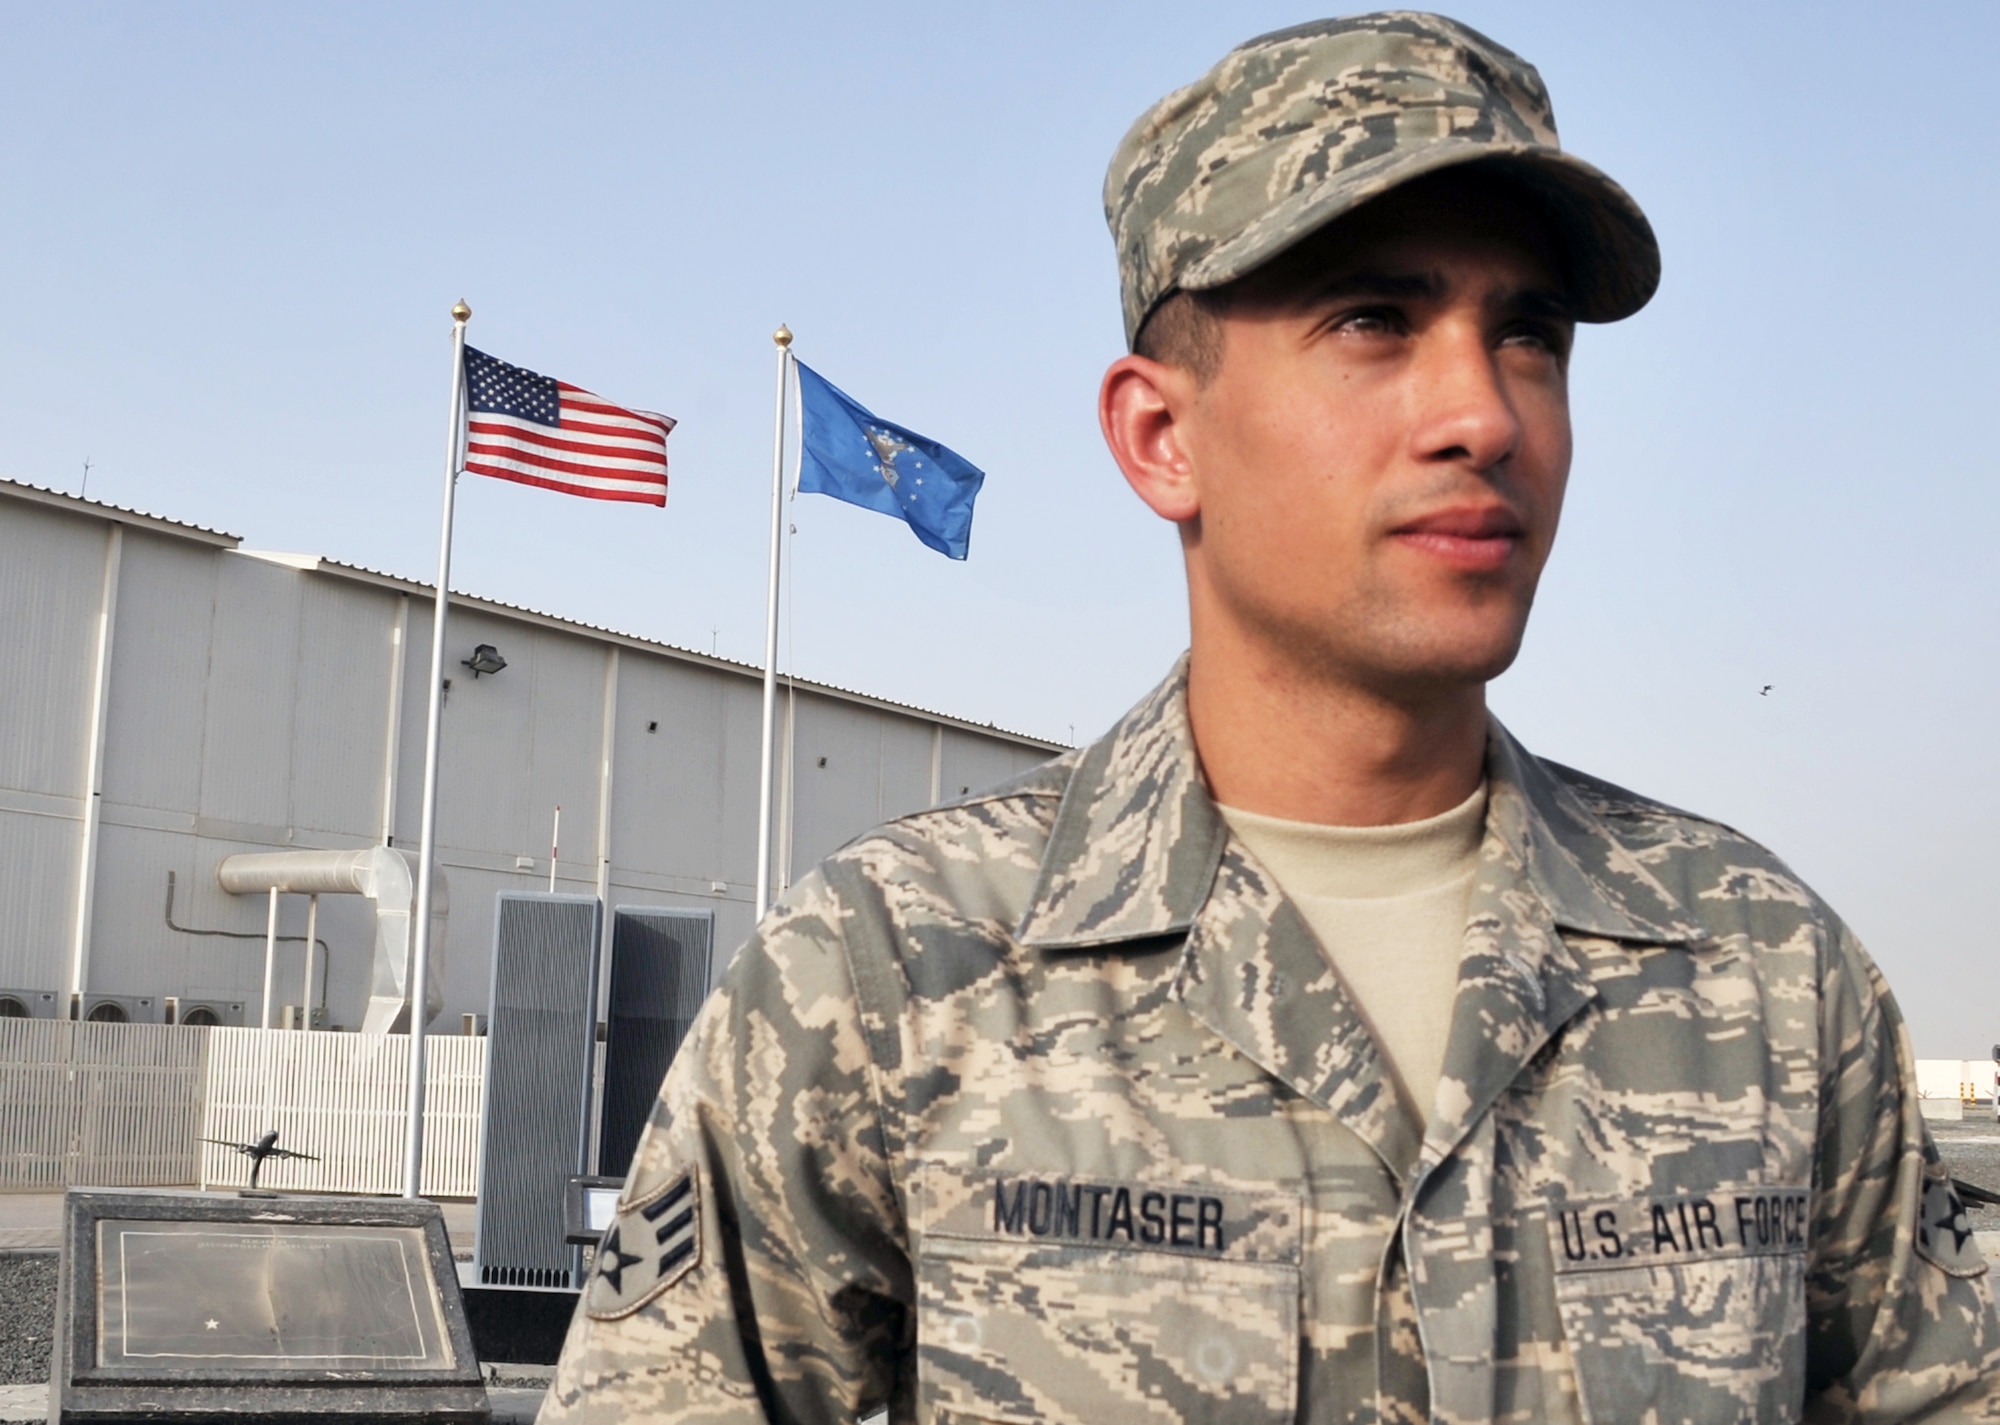 Senior Airman Abdul Montaser is a services journeyman with the 380th Expeditionary Force Support Squadron at a non-disclosed base in Southwest Asia. Here he is pictured next to the 380th Air Expeditionary Wing's 9-11 memorial. He is deployed from the New Jersey Air National Guard?s 108th Force Support Squadron at Joint Base McGuire-Dix-Lakehurst, N.J., and his hometown is Brooklyn, N.Y. (U.S. Air Force Photo/Master Sgt. Scott T. Sturkol/Released) 